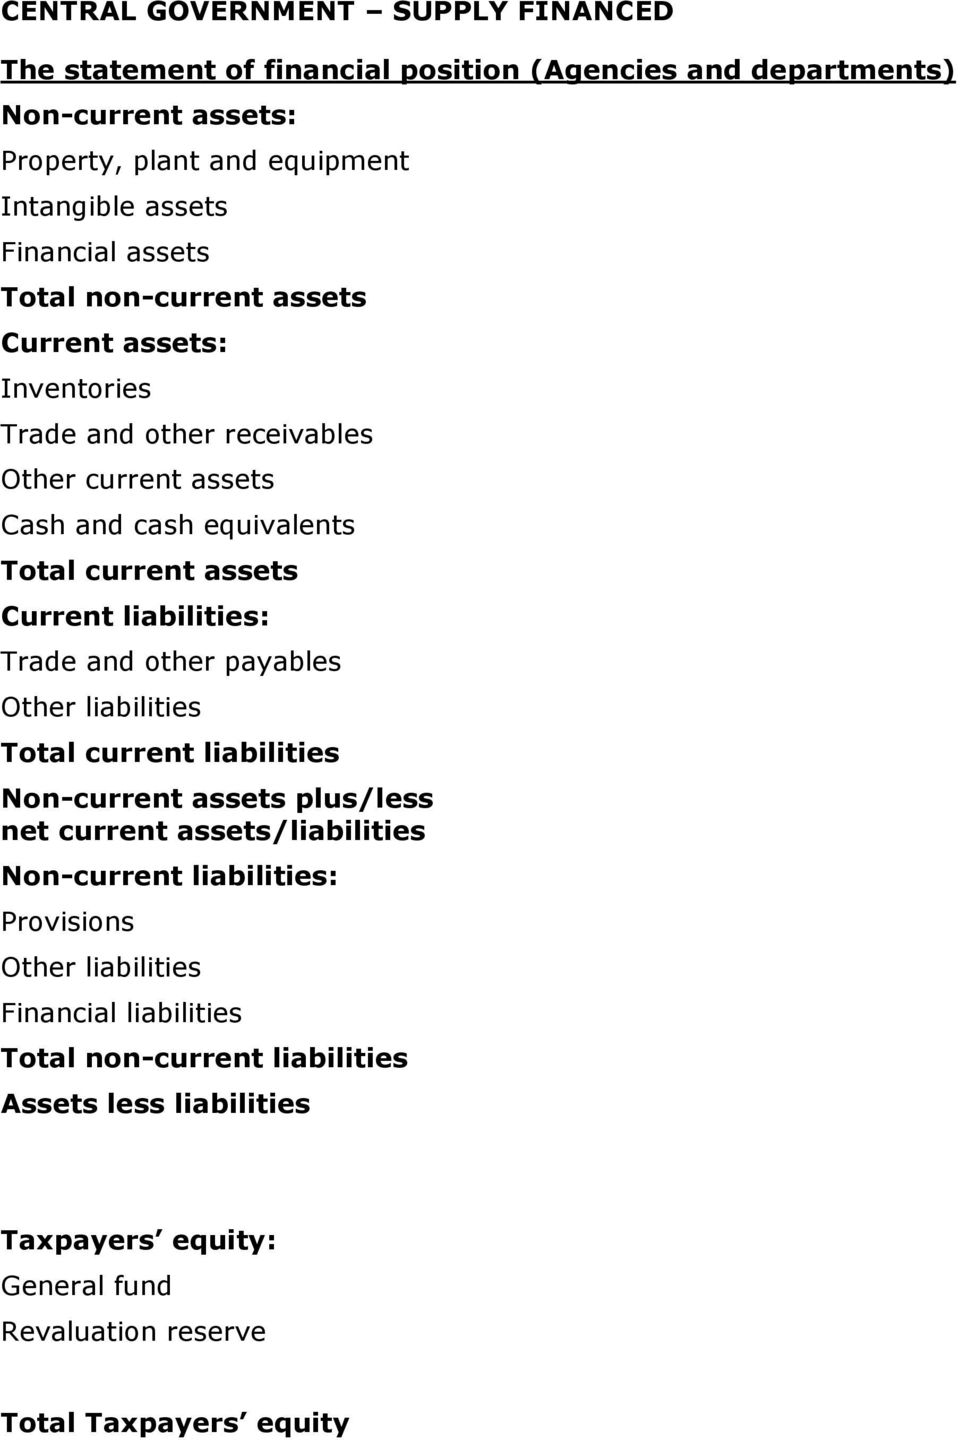 Current liabilities: Trade and other payables Other liabilities Total current liabilities Non-current assets plus/less net current assets/liabilities Non-current